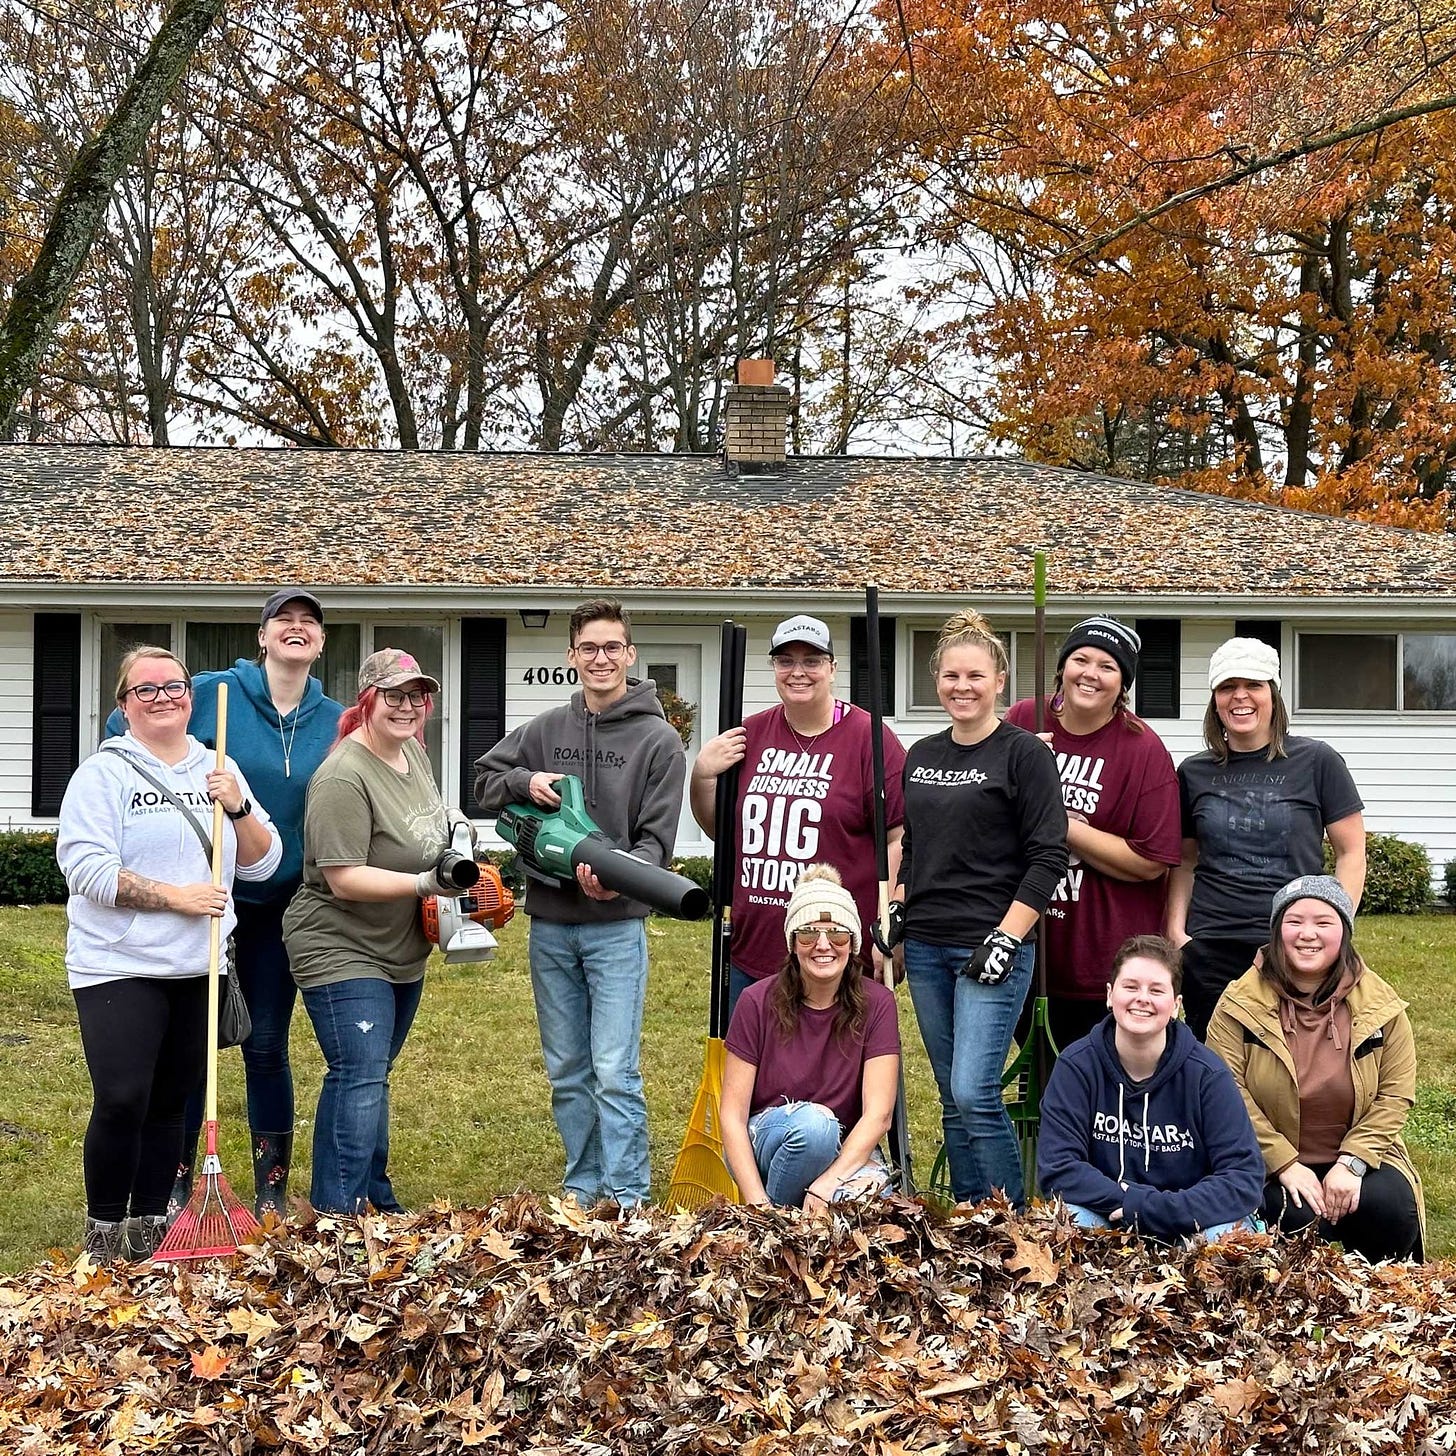 A group of Roastar employees pose behind a pile of leaves in front of a white ranch home covered in leaves from the surrounding oak and maple trees.